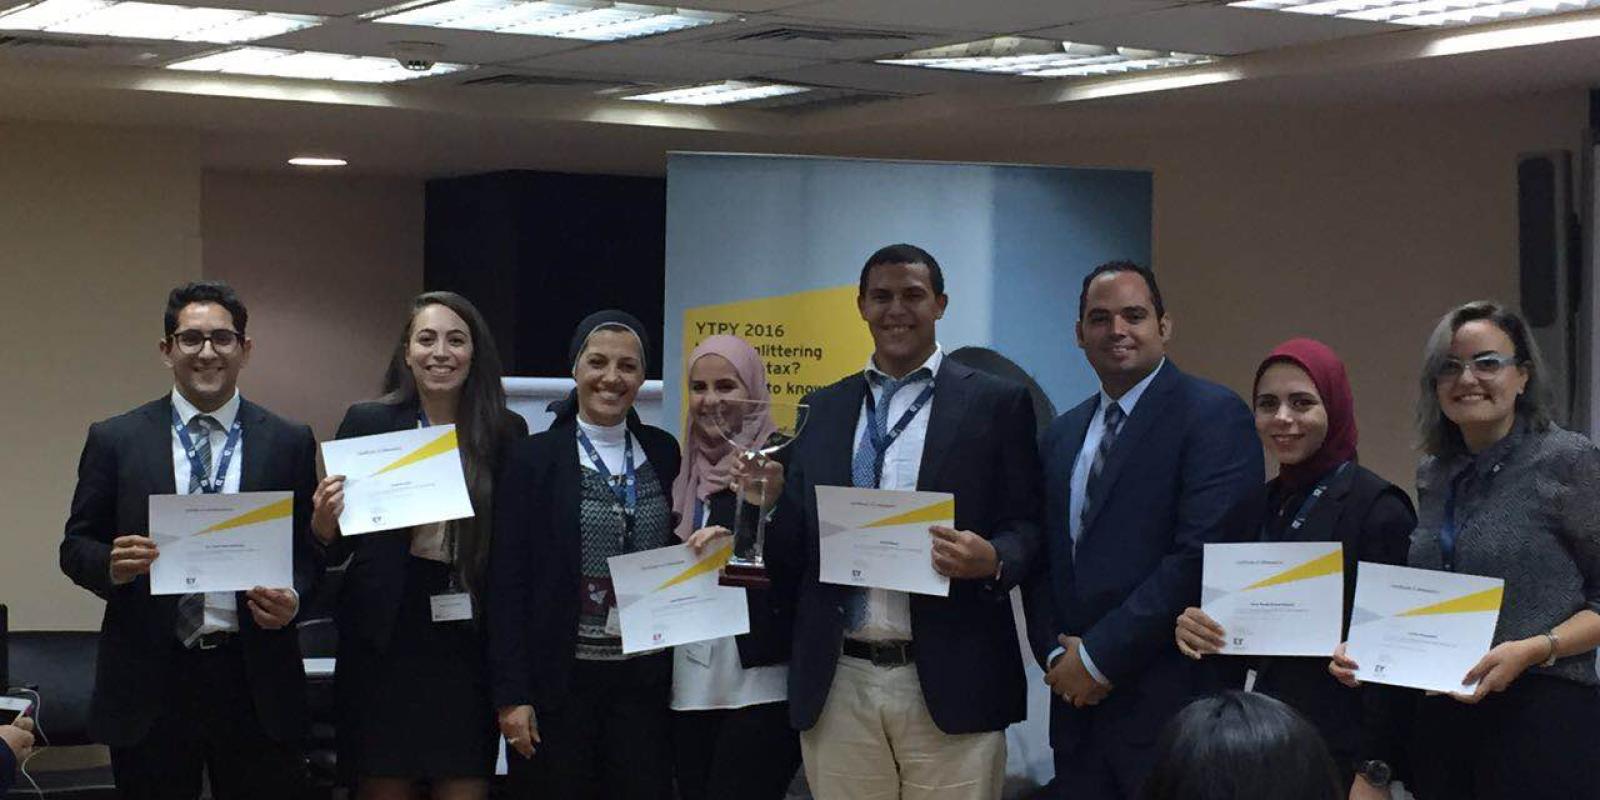 The top six finalists of the competition with HR manager and senior tax analyst at EY